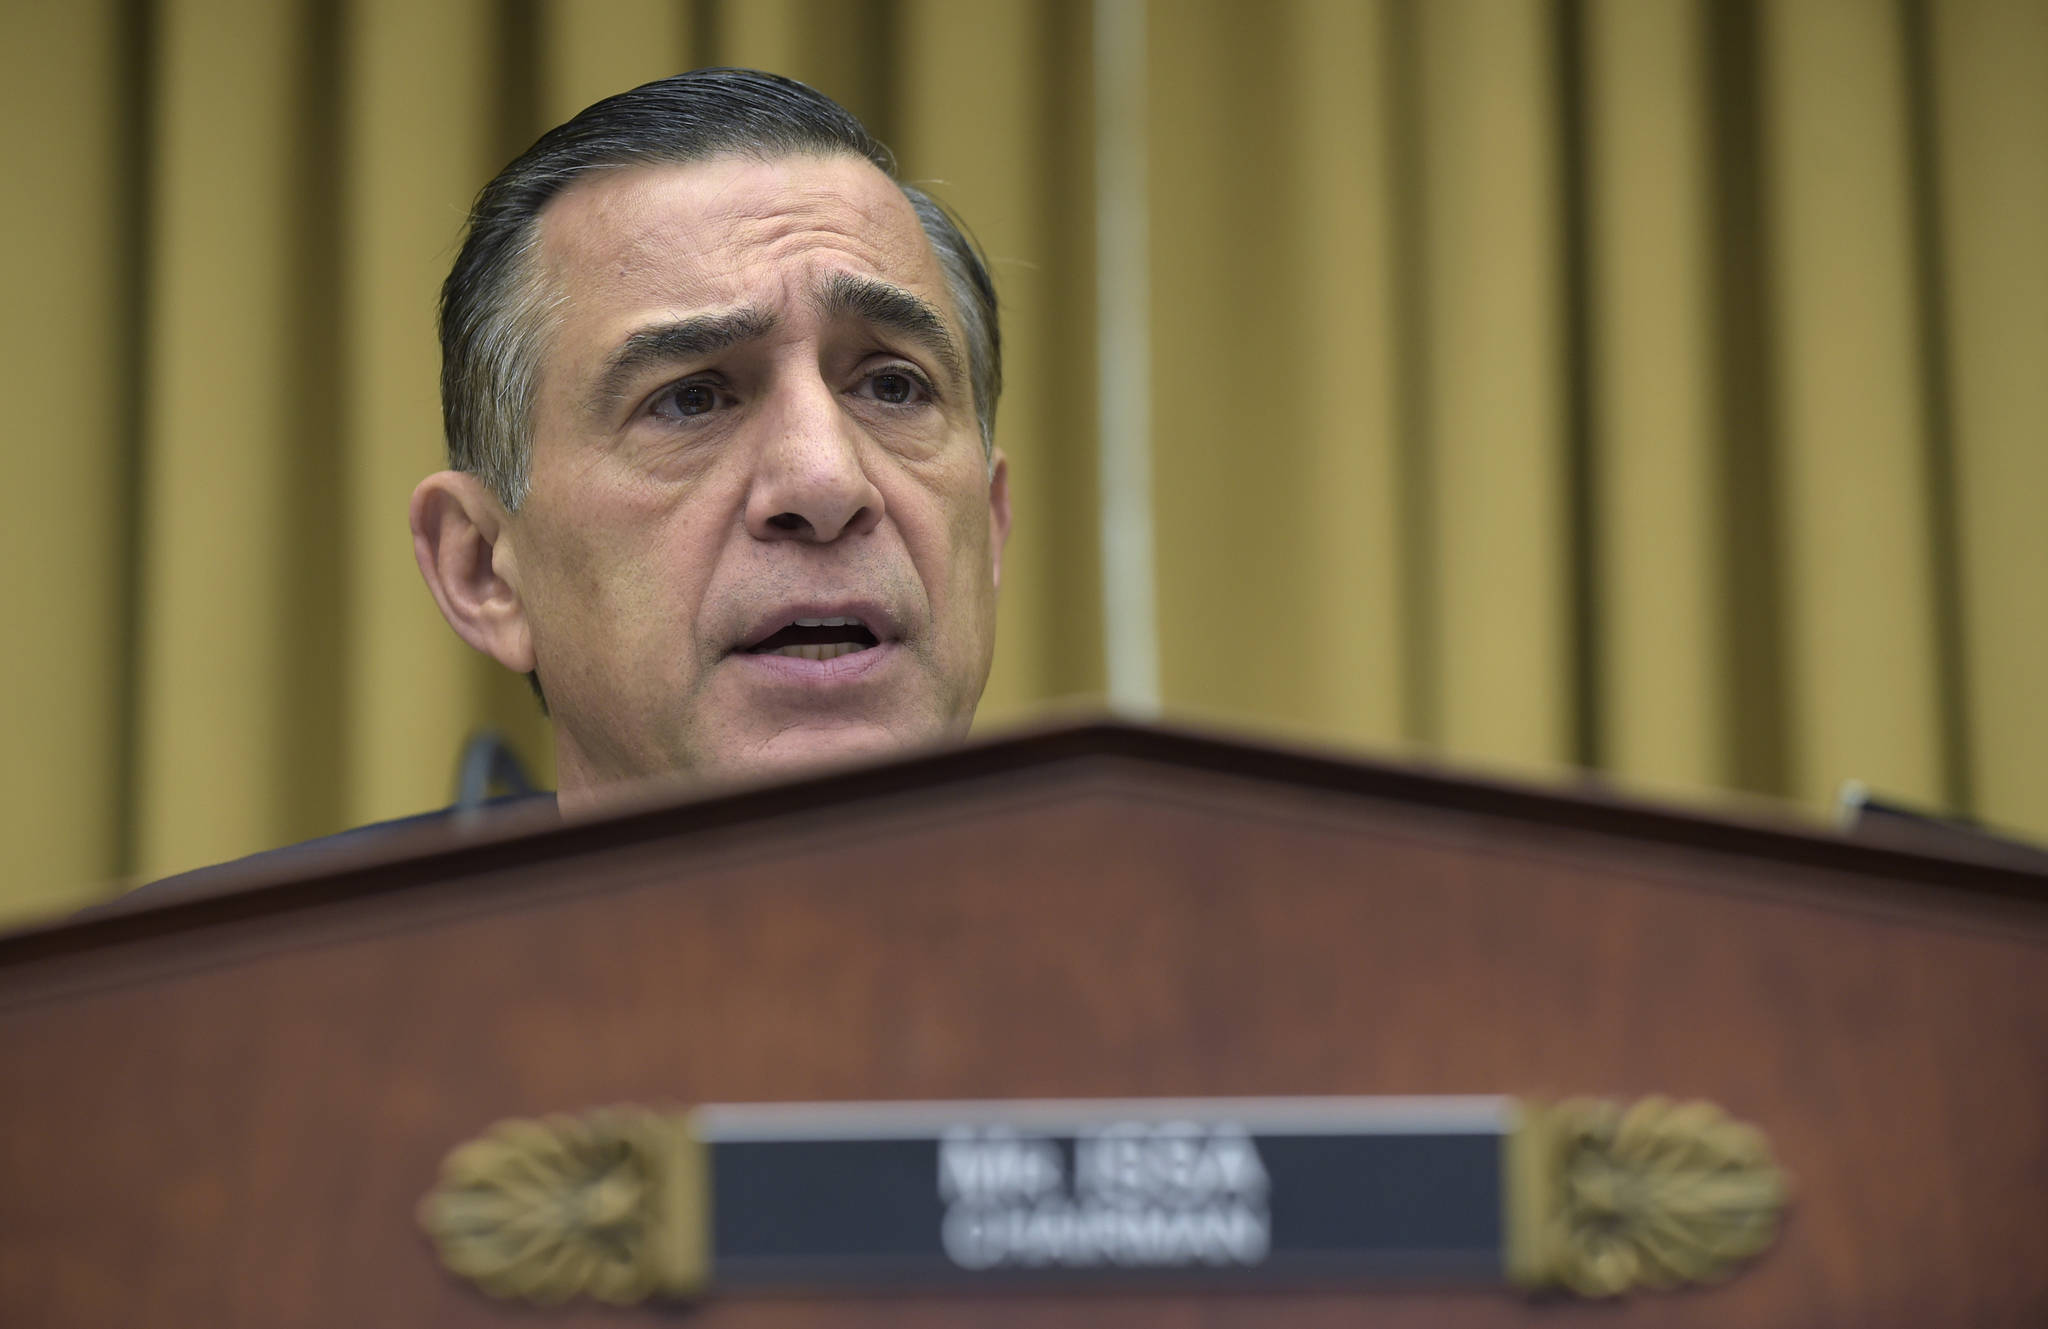 Rep. Darrell Issa, R-California, the chairman of the House Judiciary subcommittee on Courts, Intellectual Property, and the Internet speaks during a hearing on Capitol Hill Thursday on the restructuring the U.S. Court of Appeals for the Ninth Circuit.. (Susan Walsh | The Associated Press)